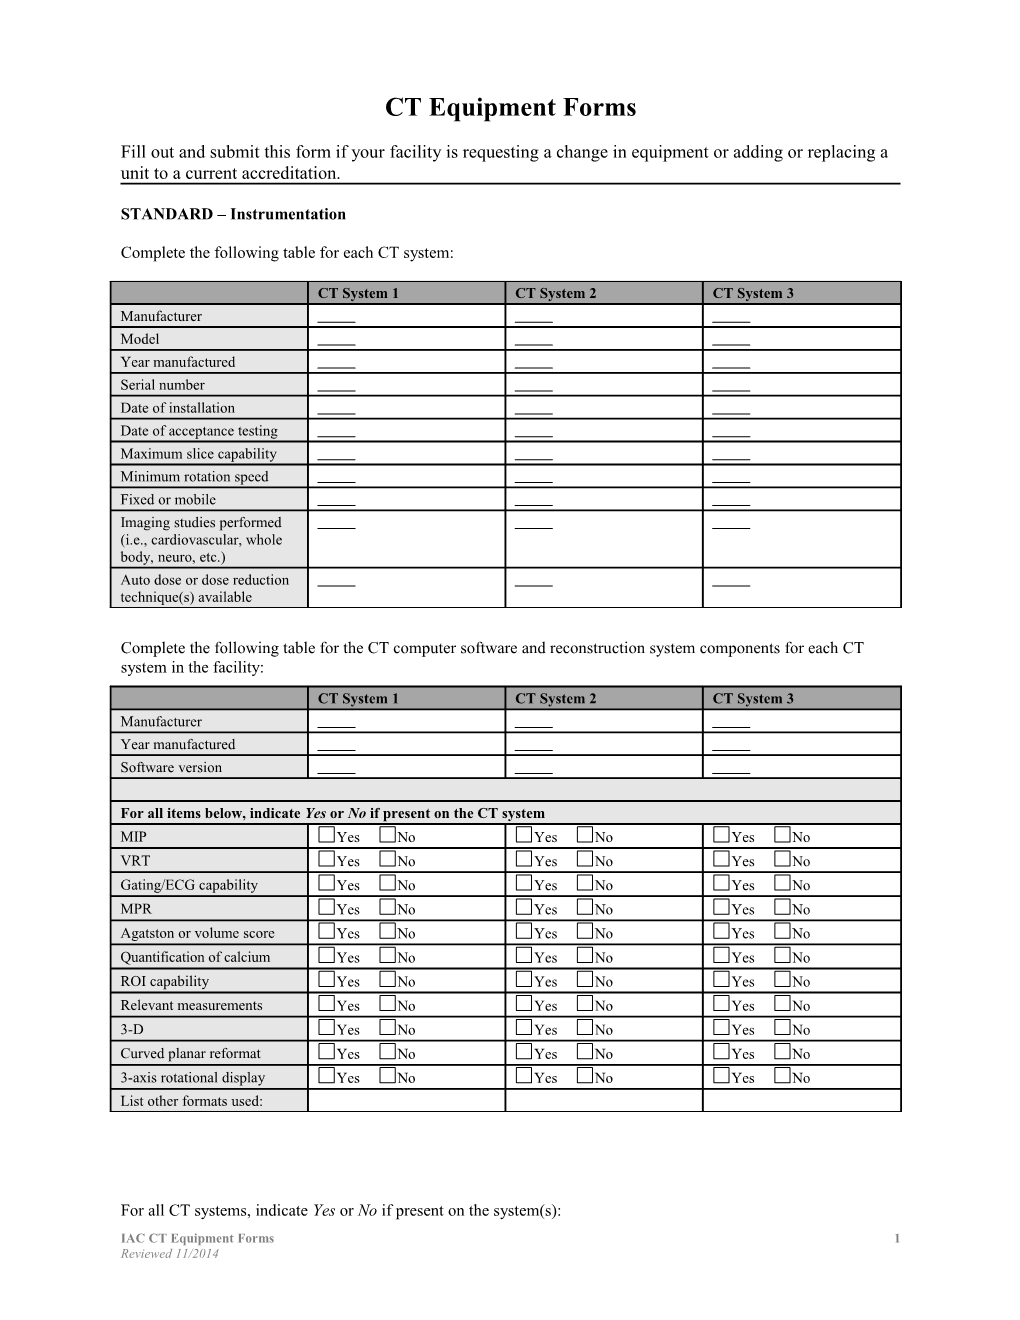 ICACTL Equipment Forms